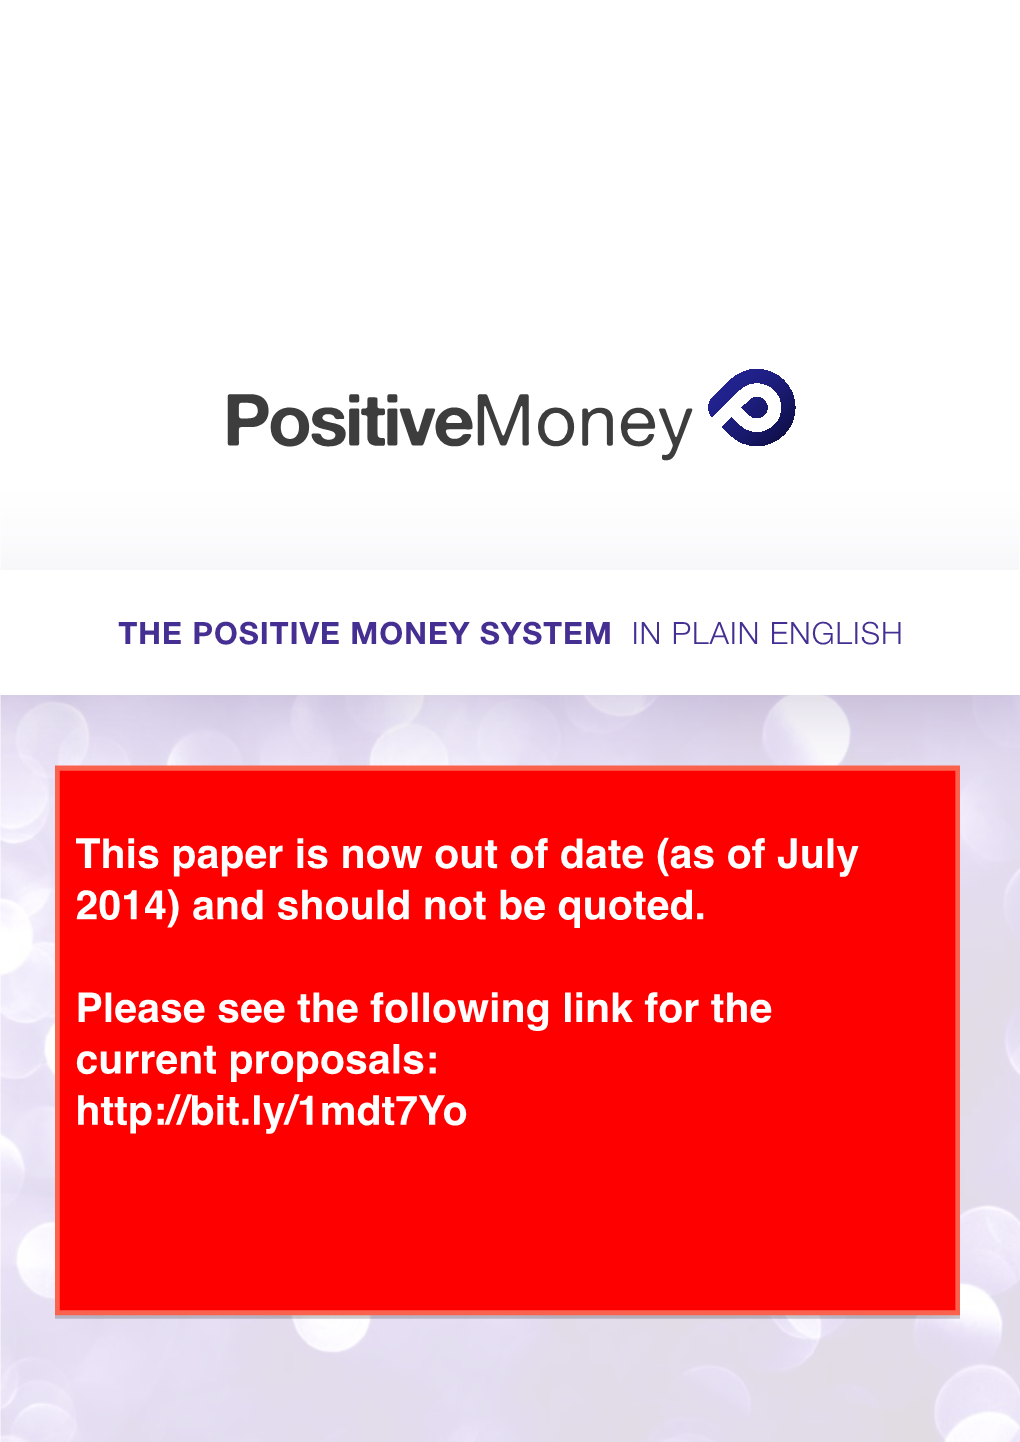 The Positive Money System in Plain English 2 the Positive Money System in Plain English